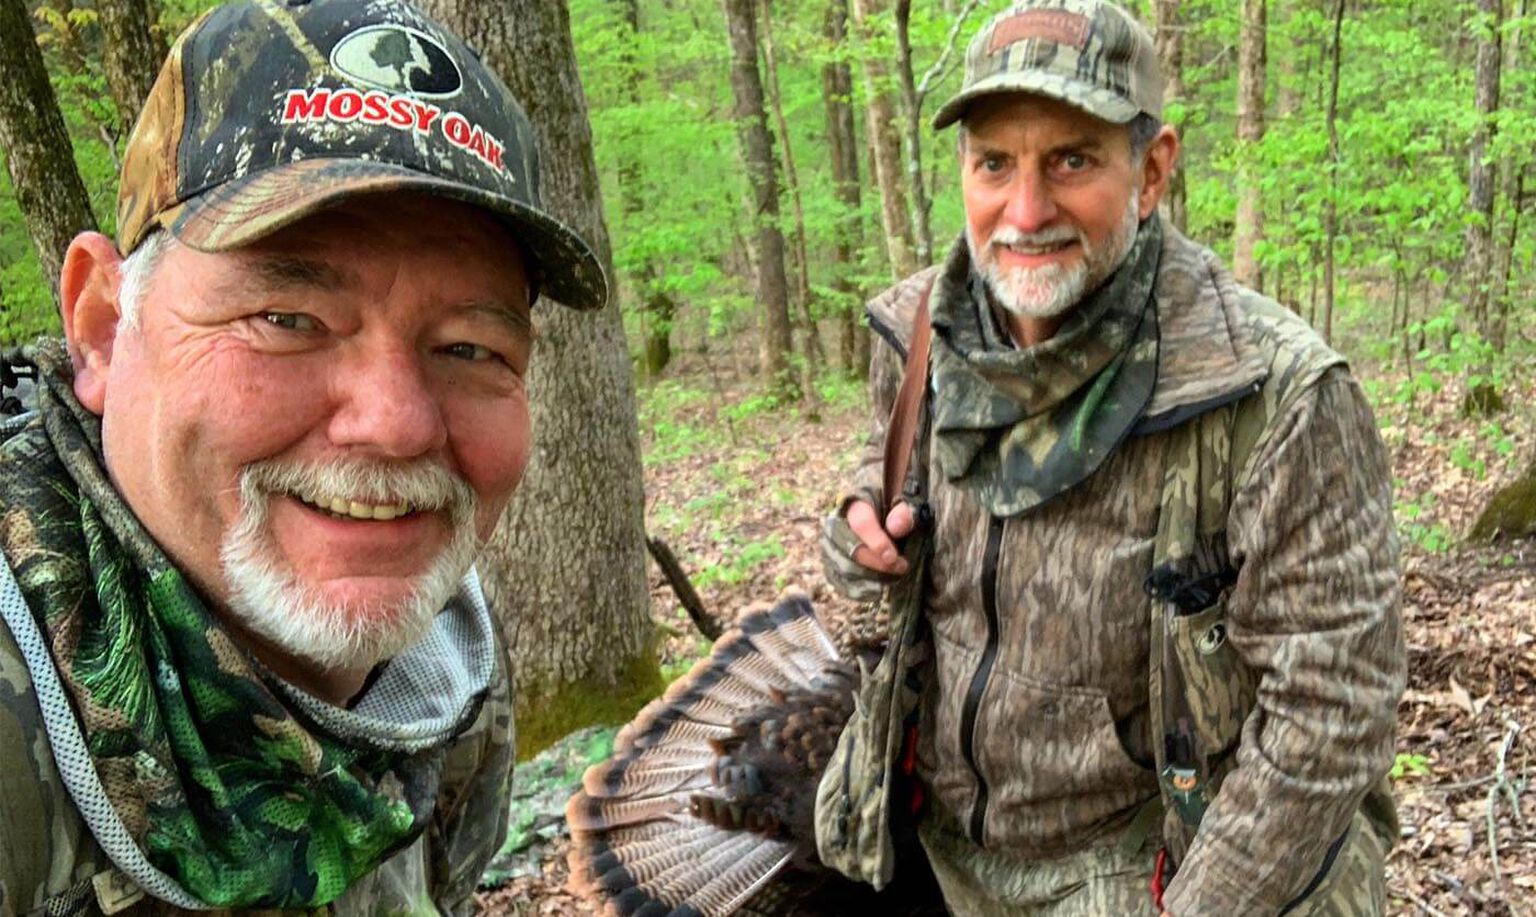 Primos Hunting and Mossy Oak. Products Rooted in Respect